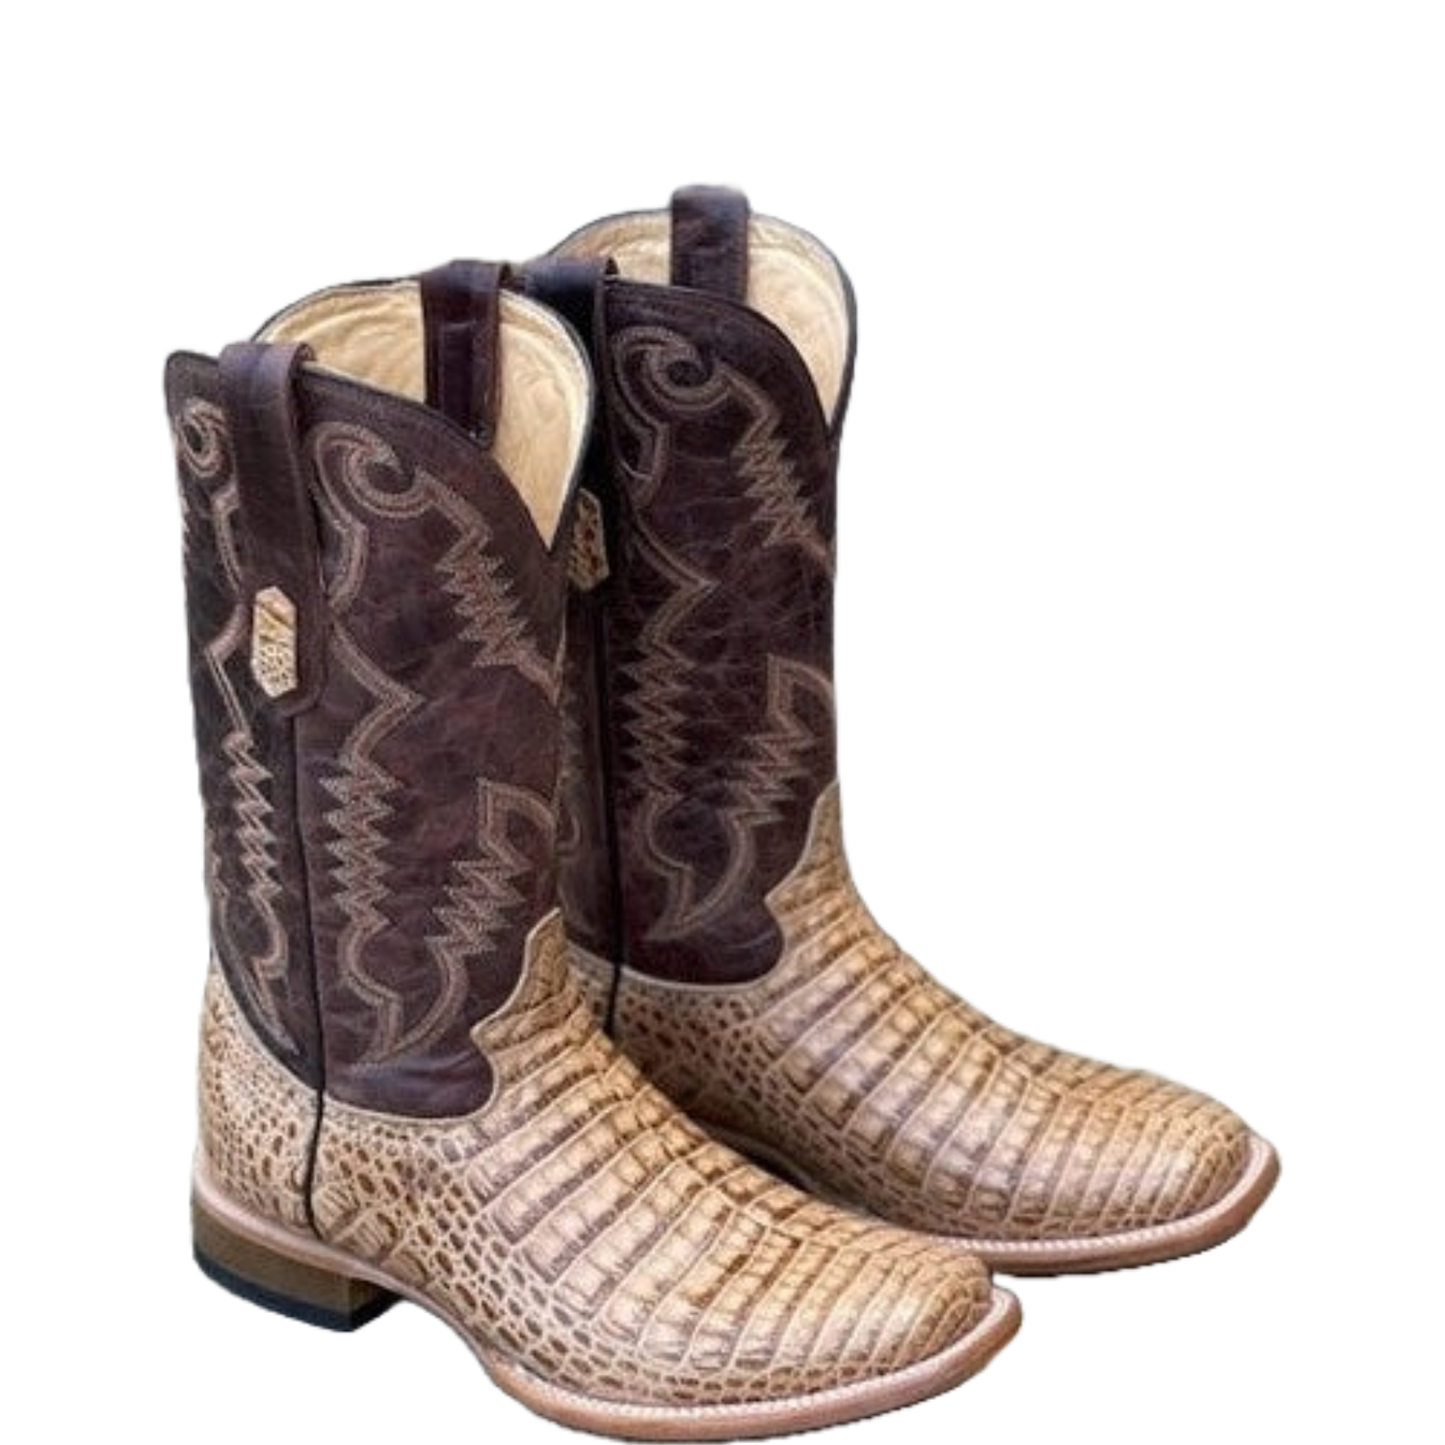 Cowtown Men's Orxy Caiman Belly Print Square Toe Western Boots Q6153